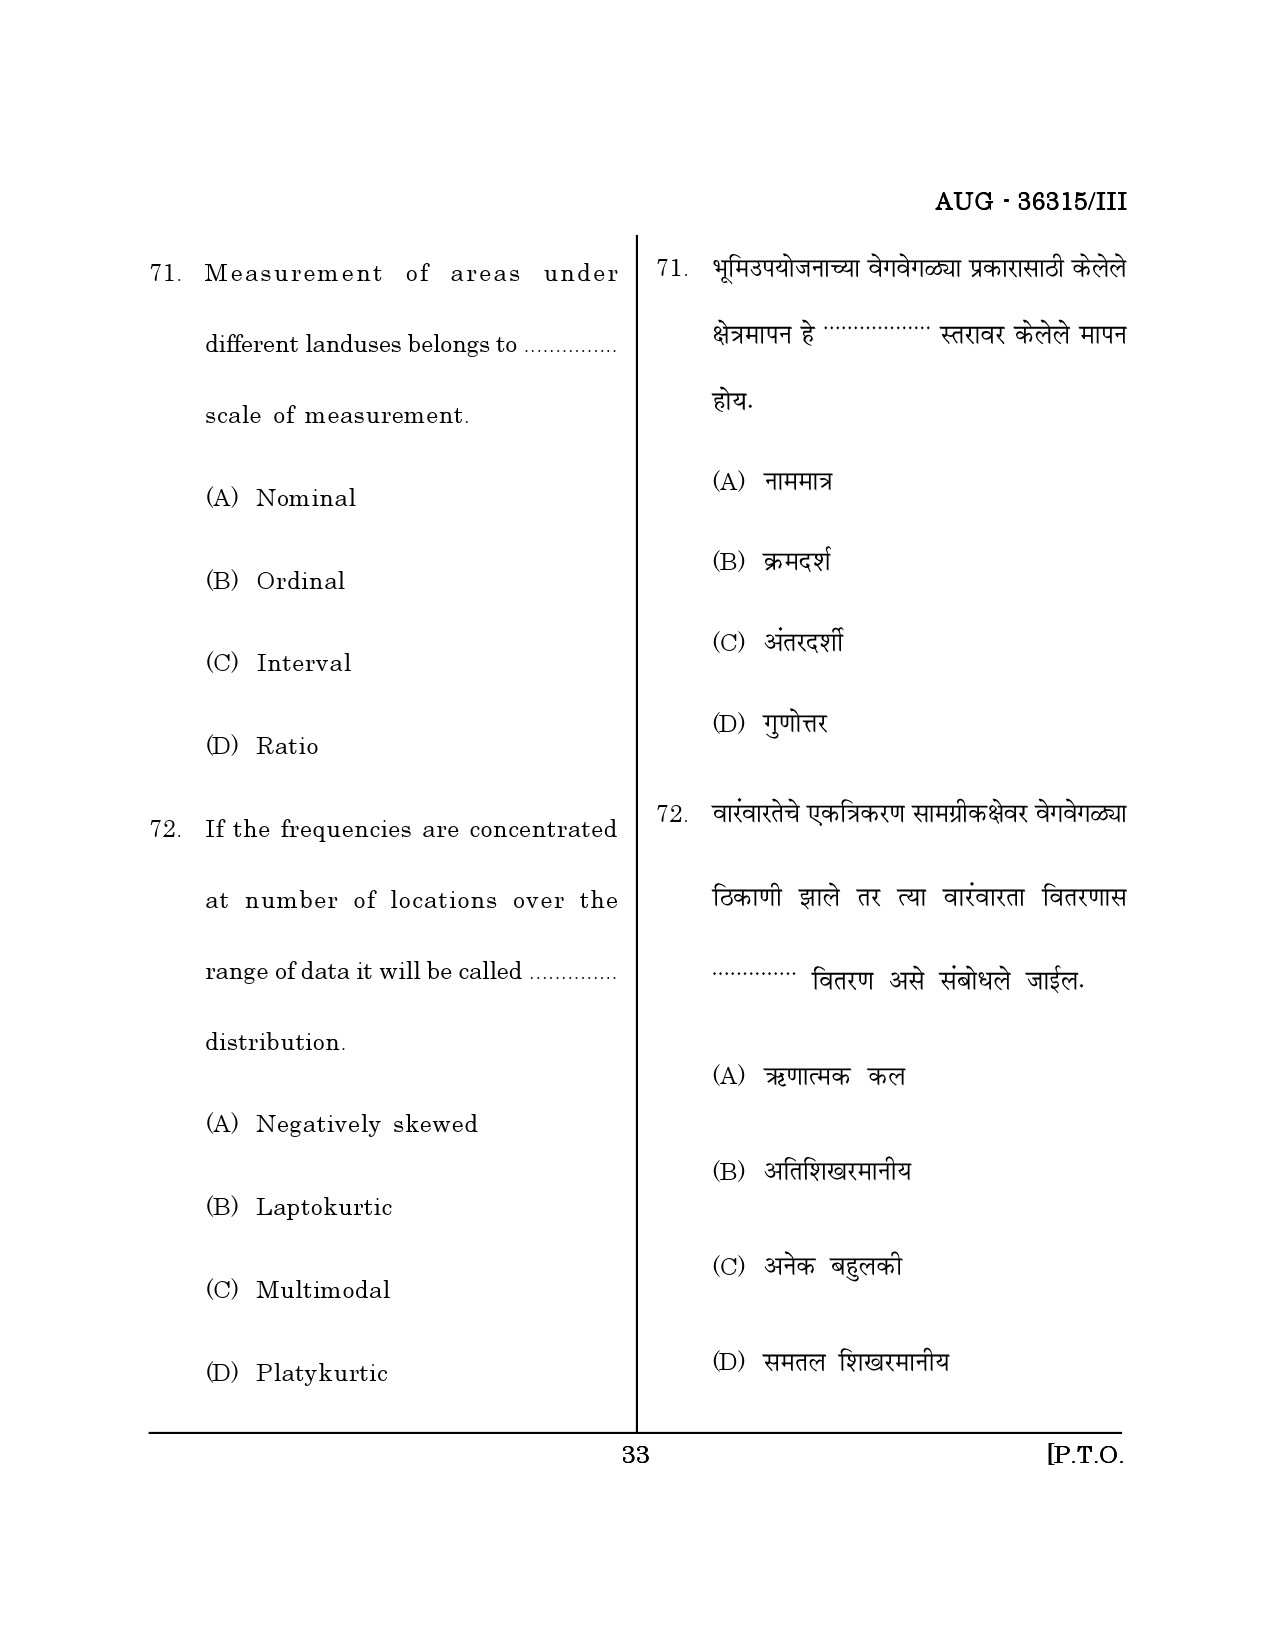 Maharashtra SET Geography Question Paper III August 2015 32